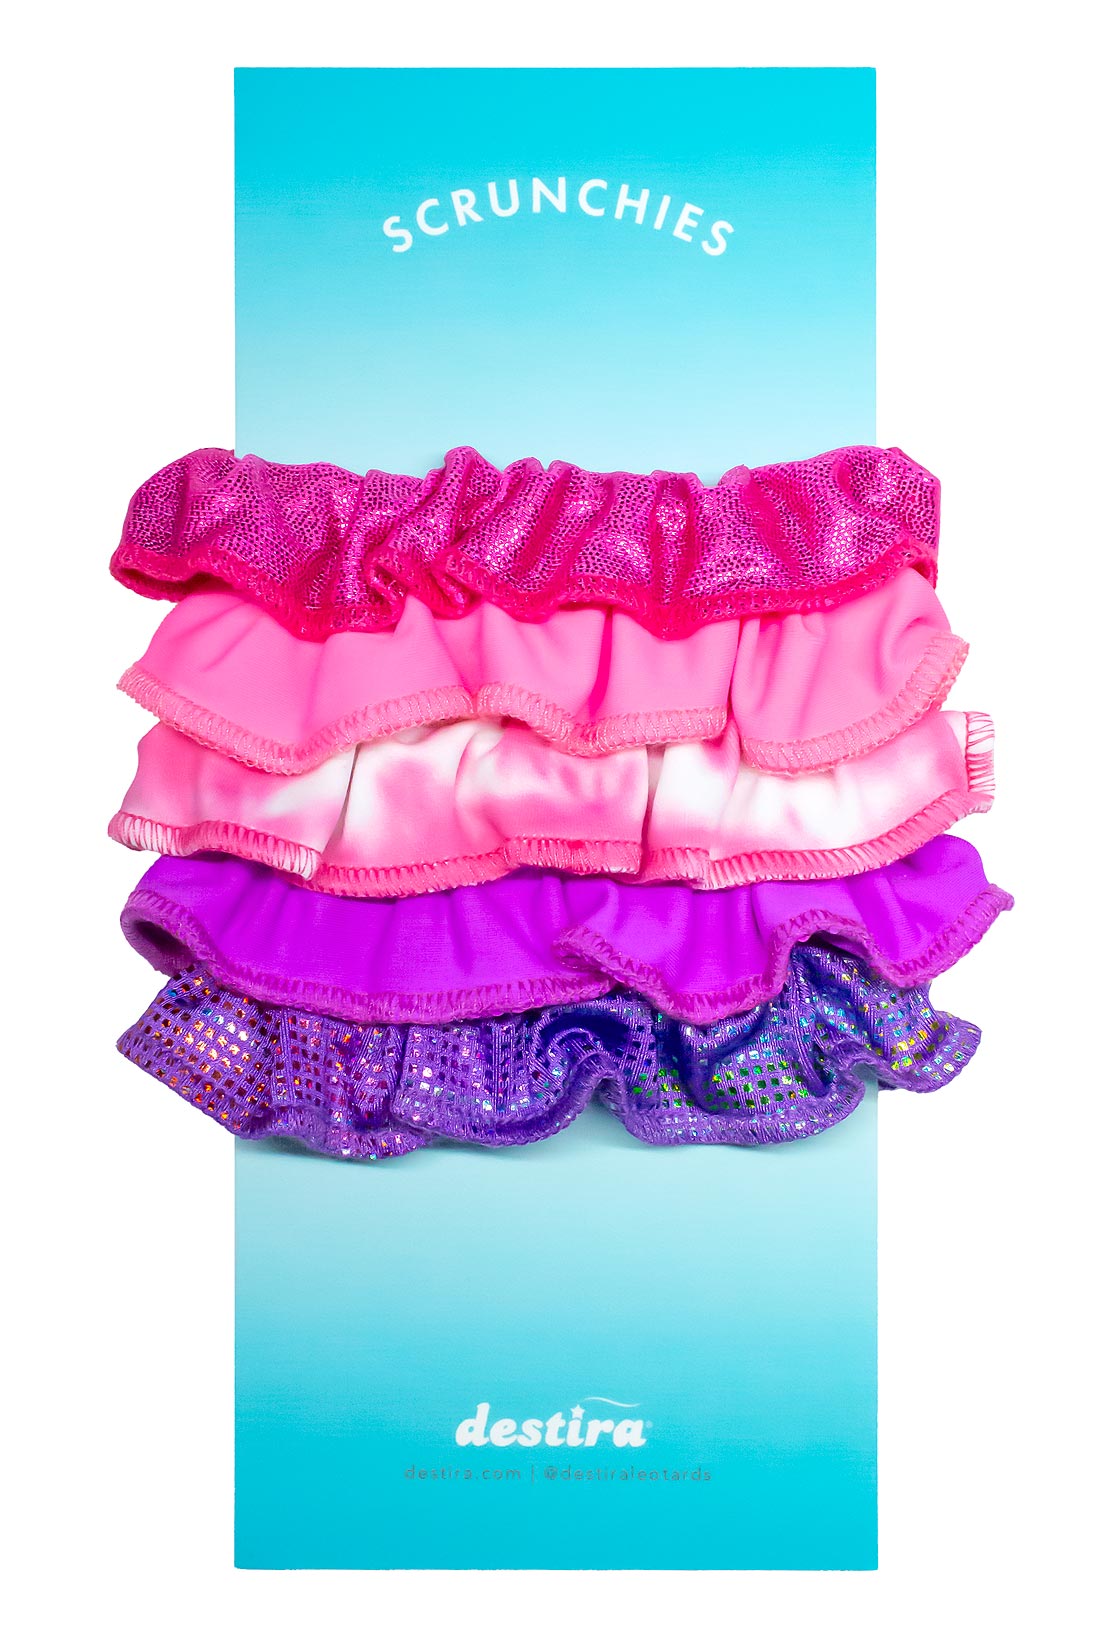 Multi-pack of pink and purple scrunchies for hair, Destira, 2023